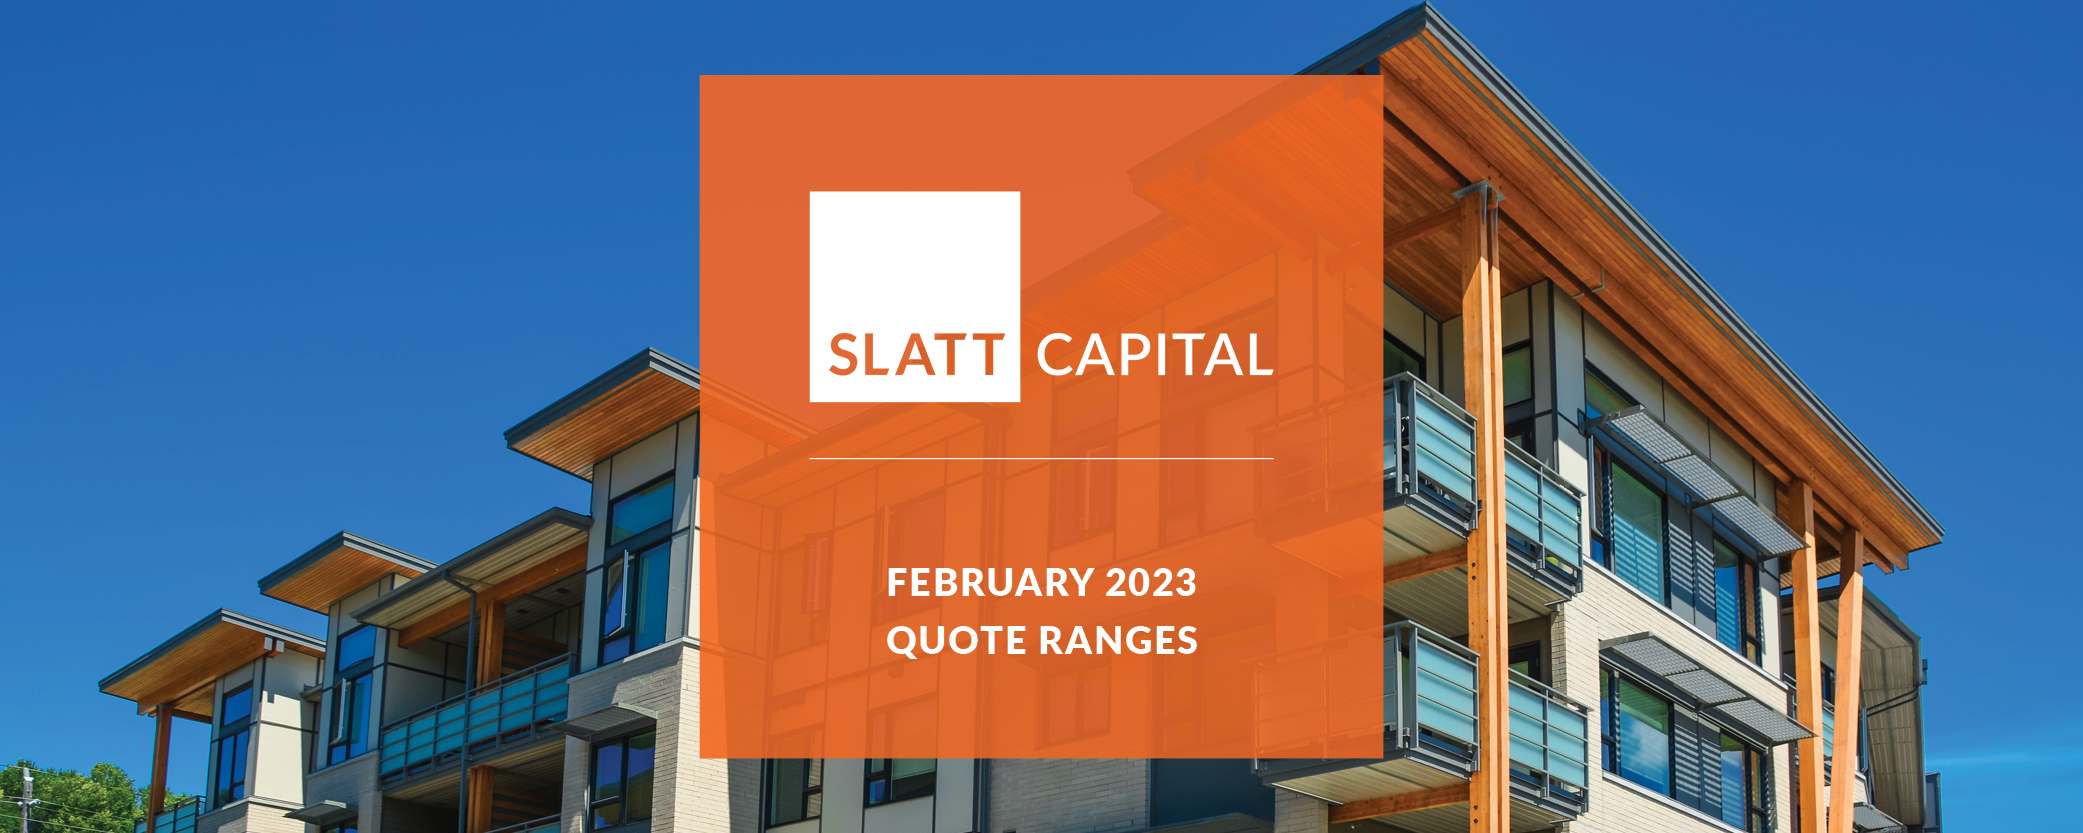 February 2023 cre interest rate ranges & lowest rates: past 60 days